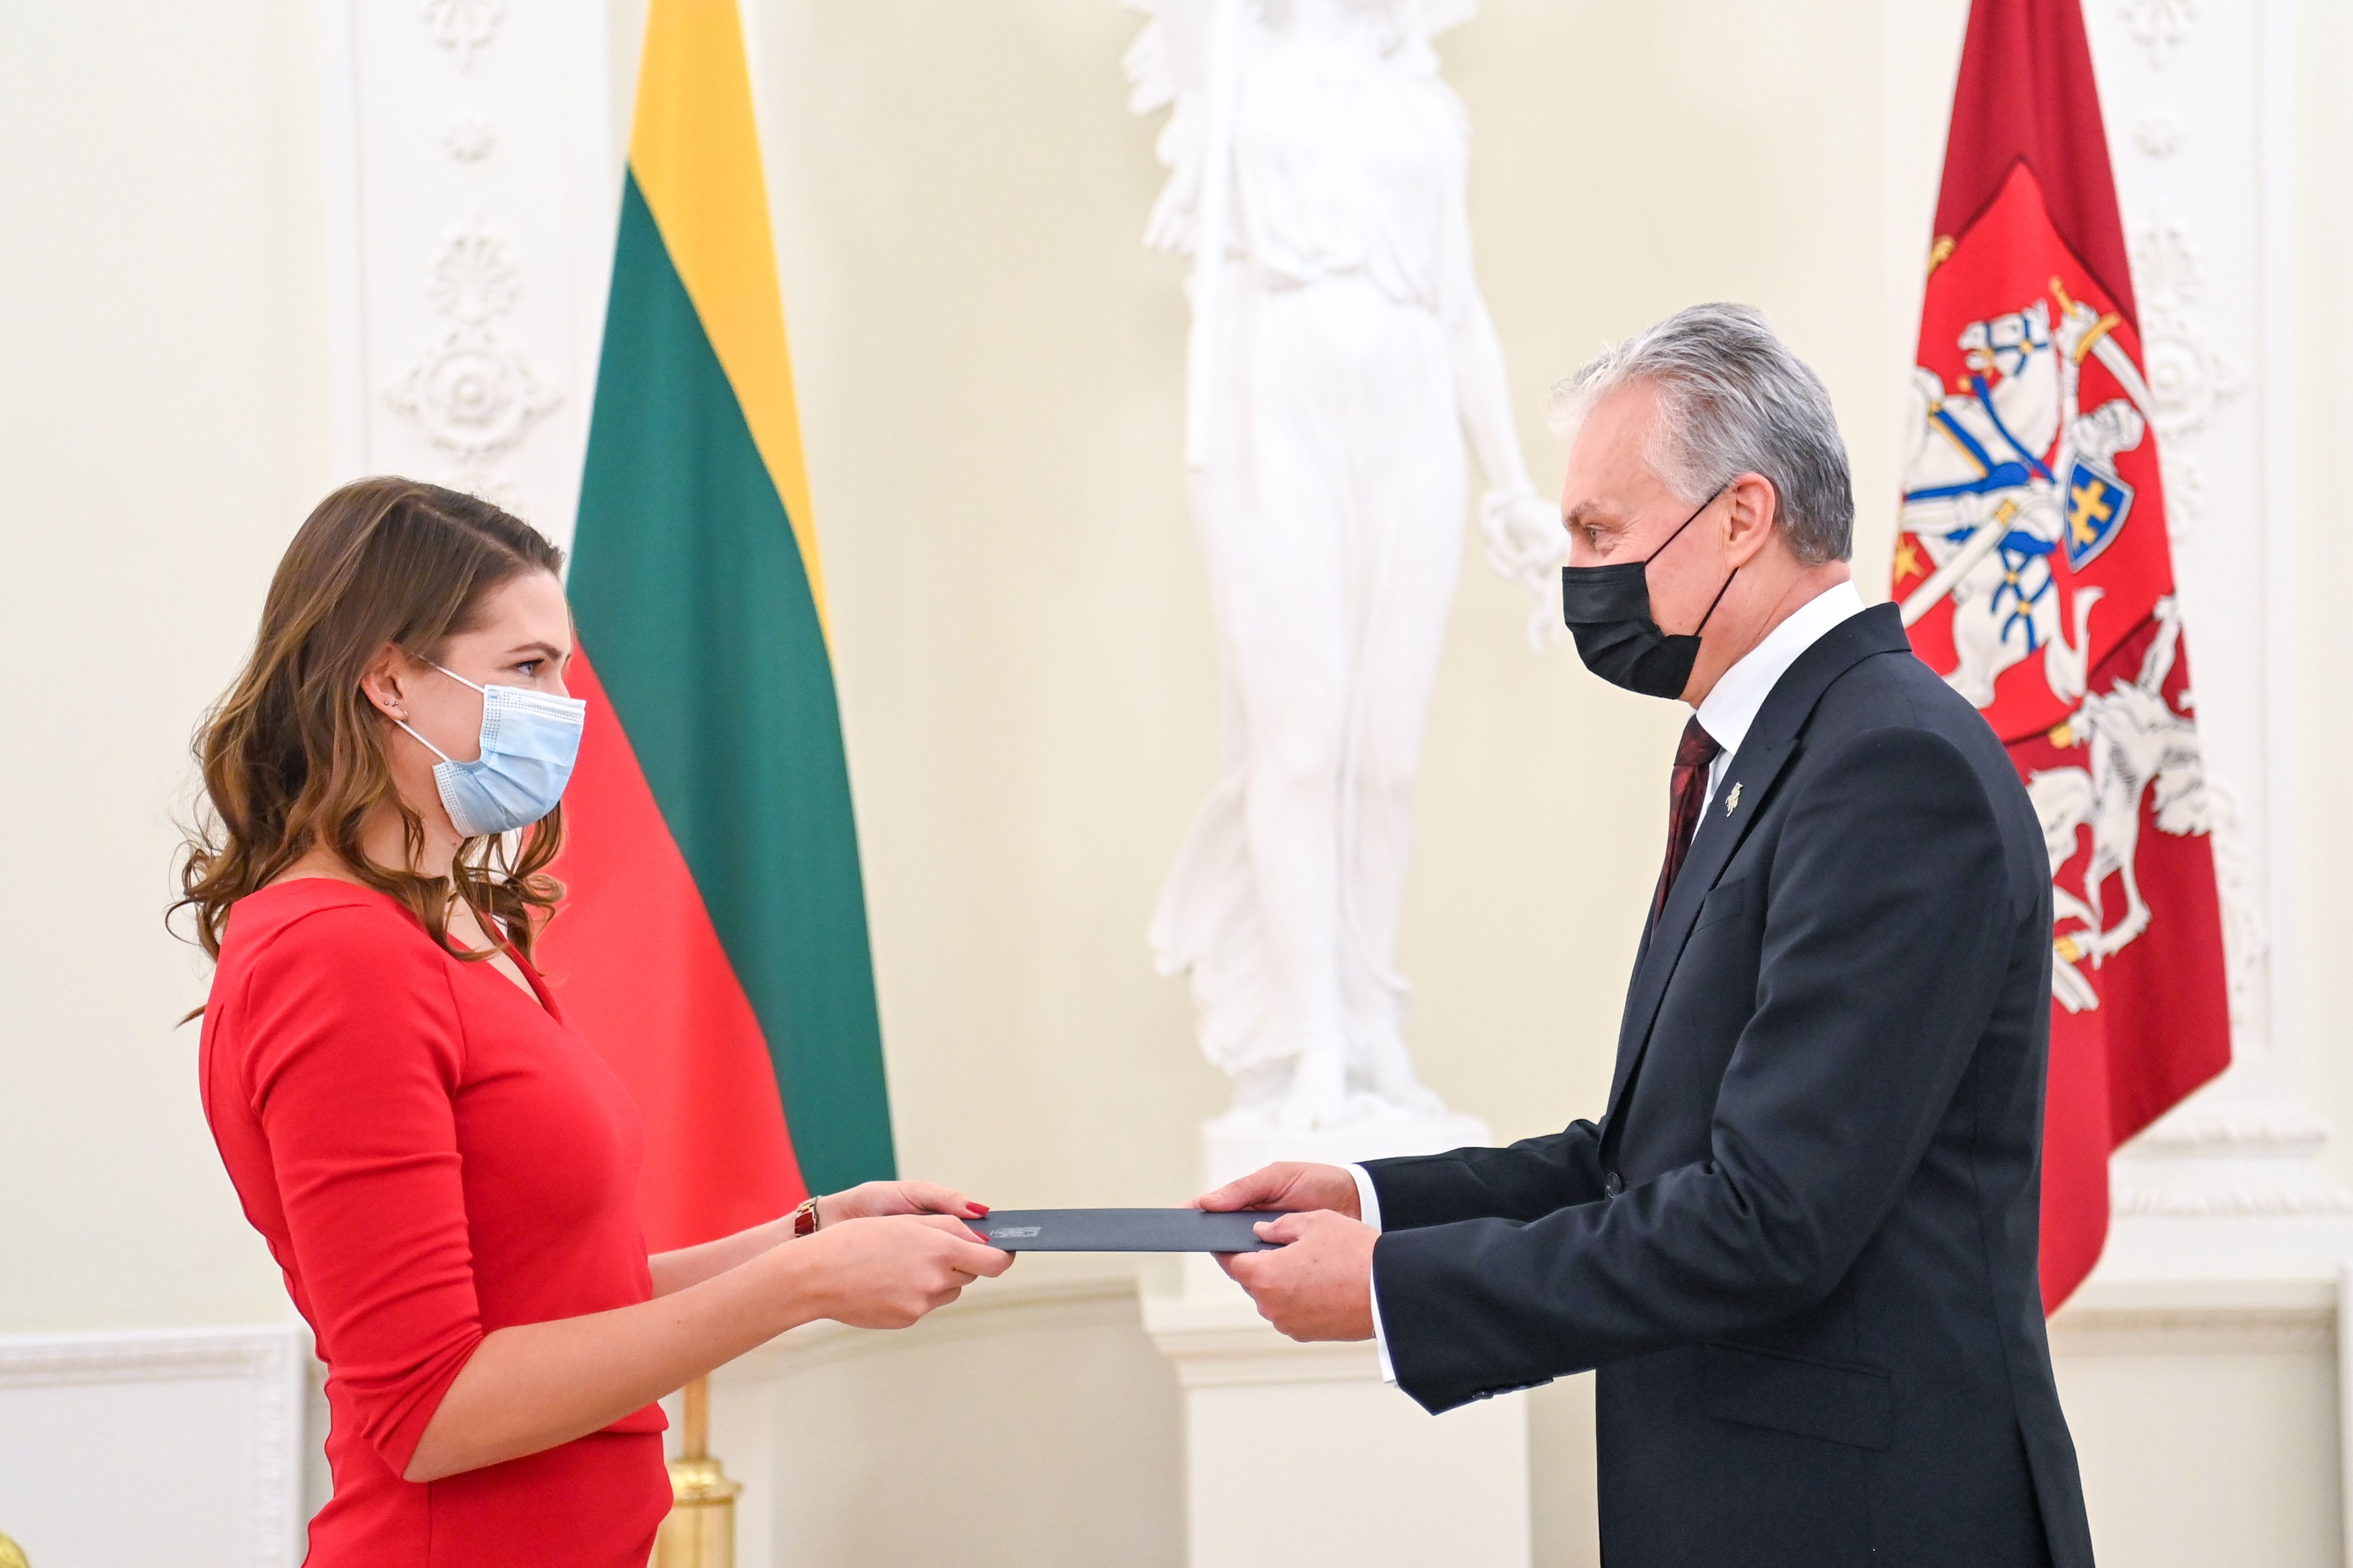 Office of the President of the Republic of Lithuania/official photos by Robertas Dačkus